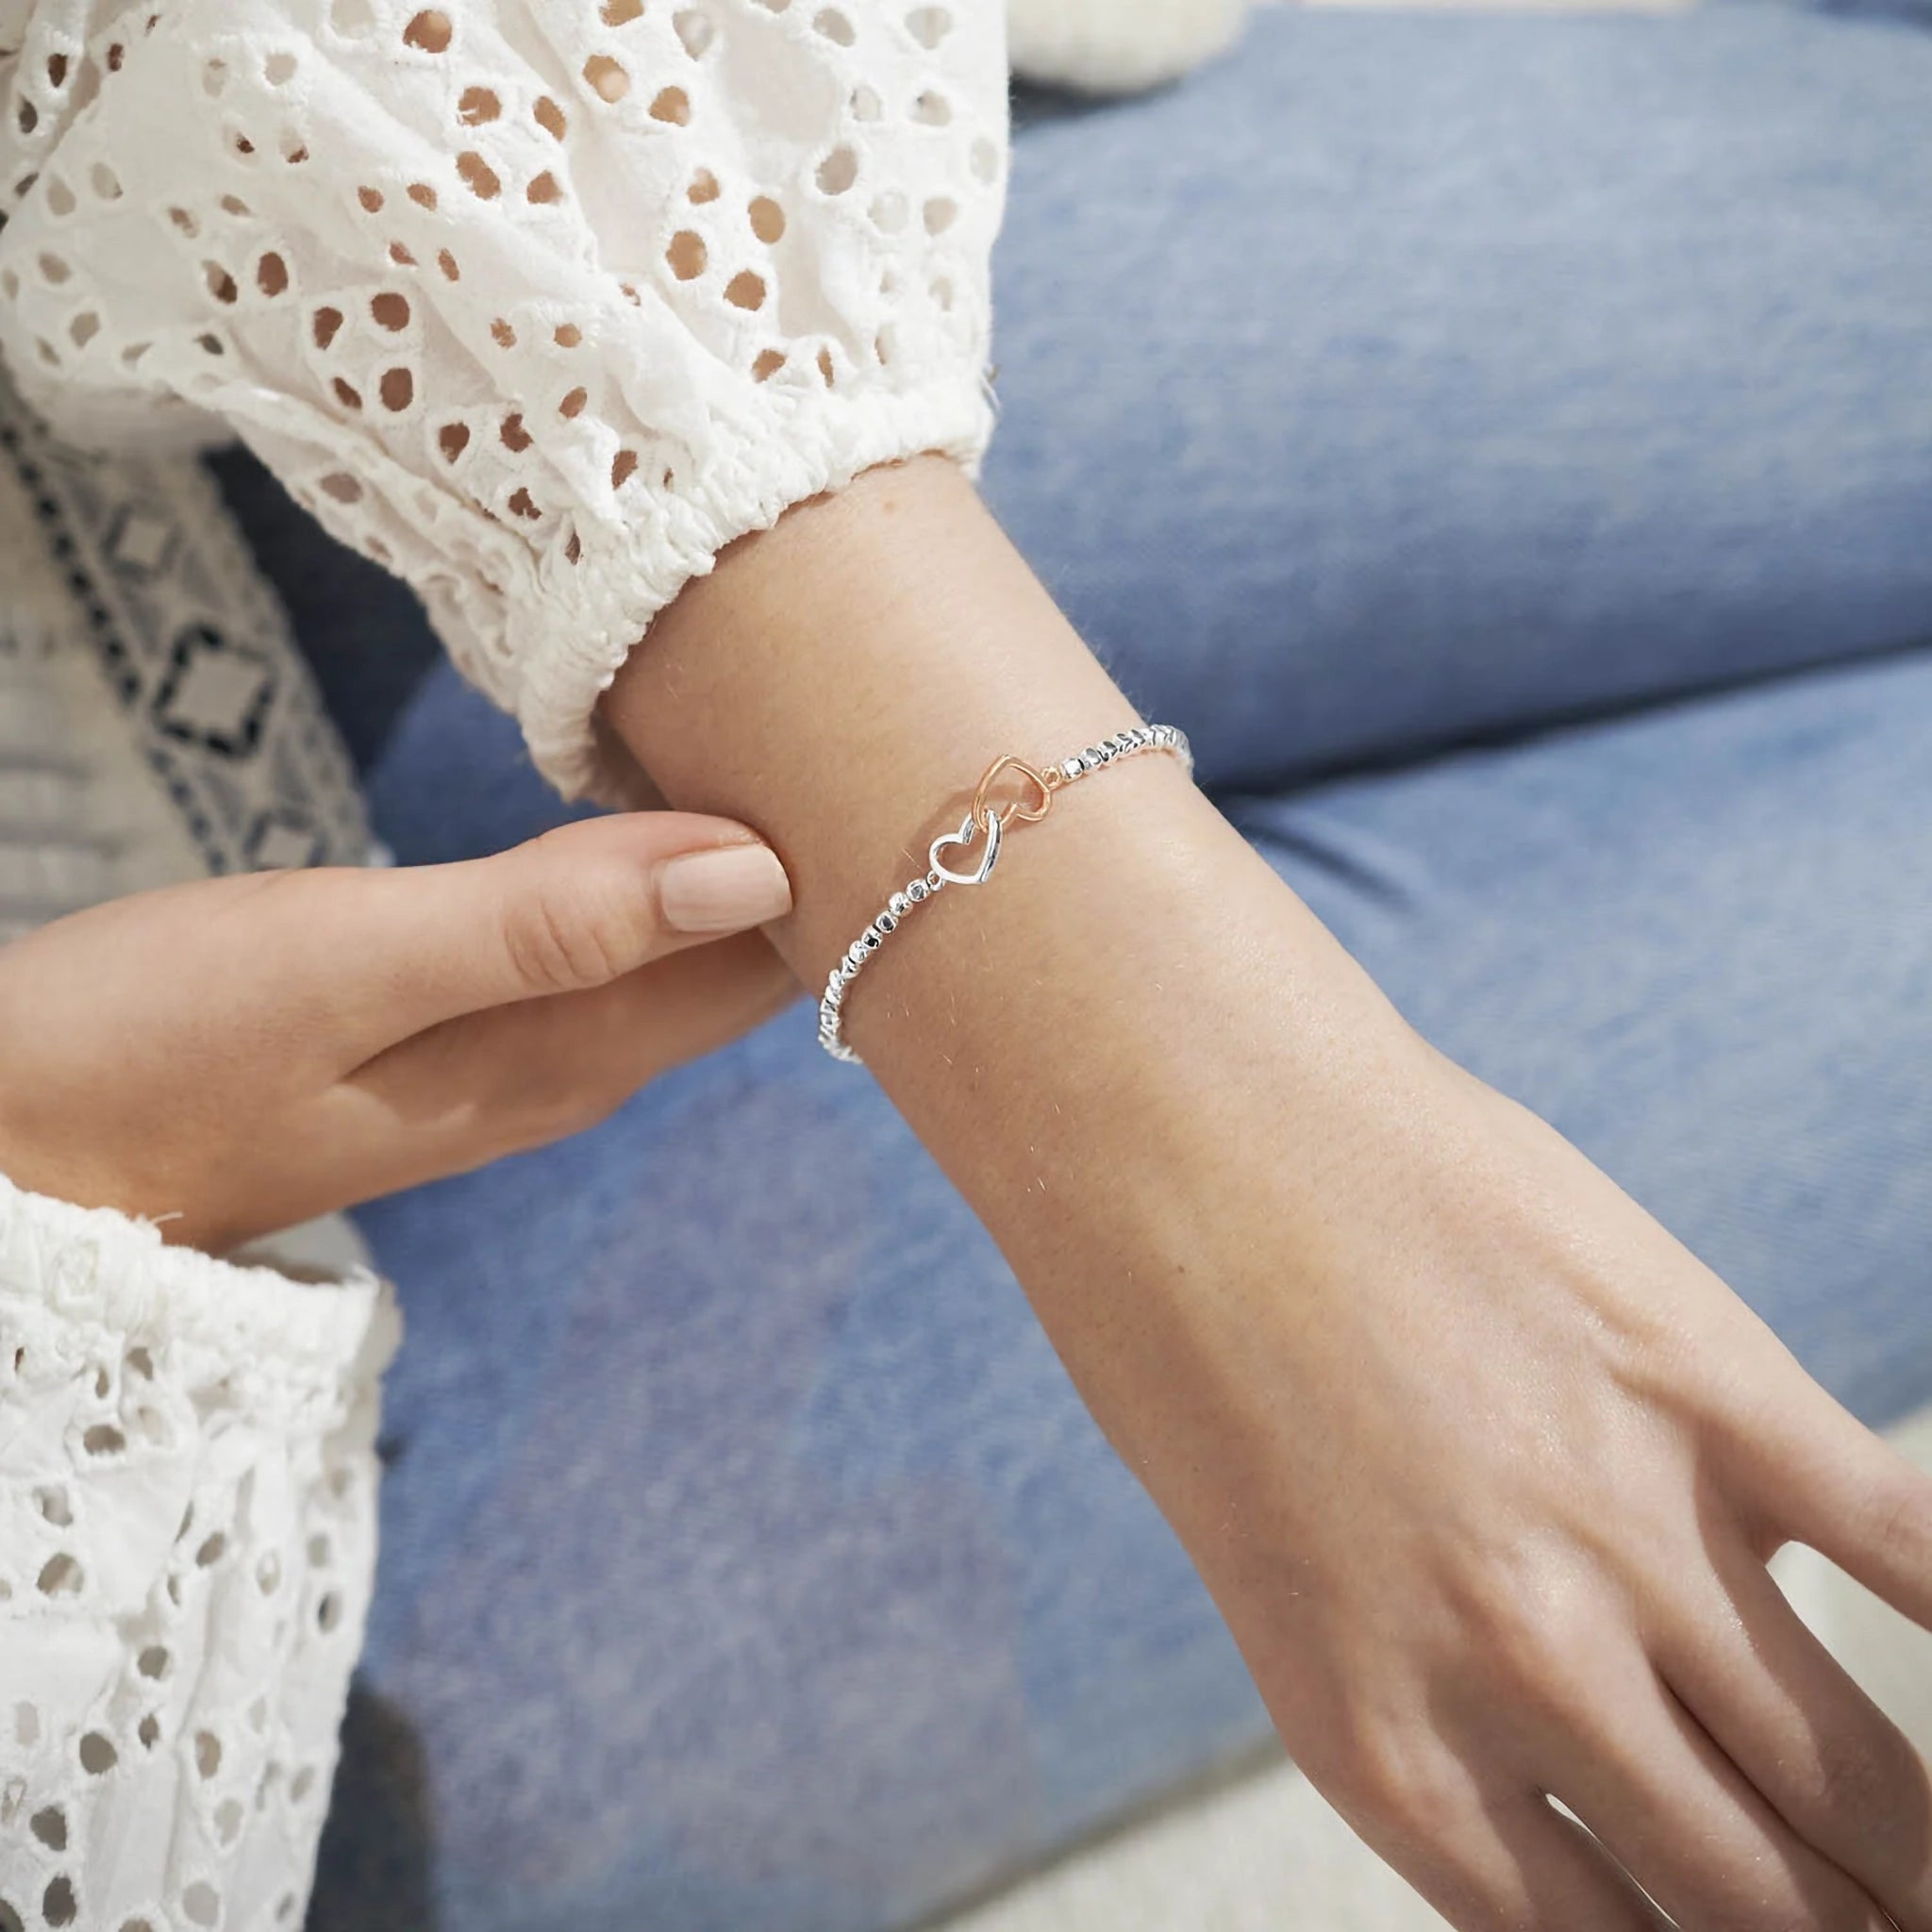 Model wearing a silver beaded bracelet with rose gold and silver interlinking hearts